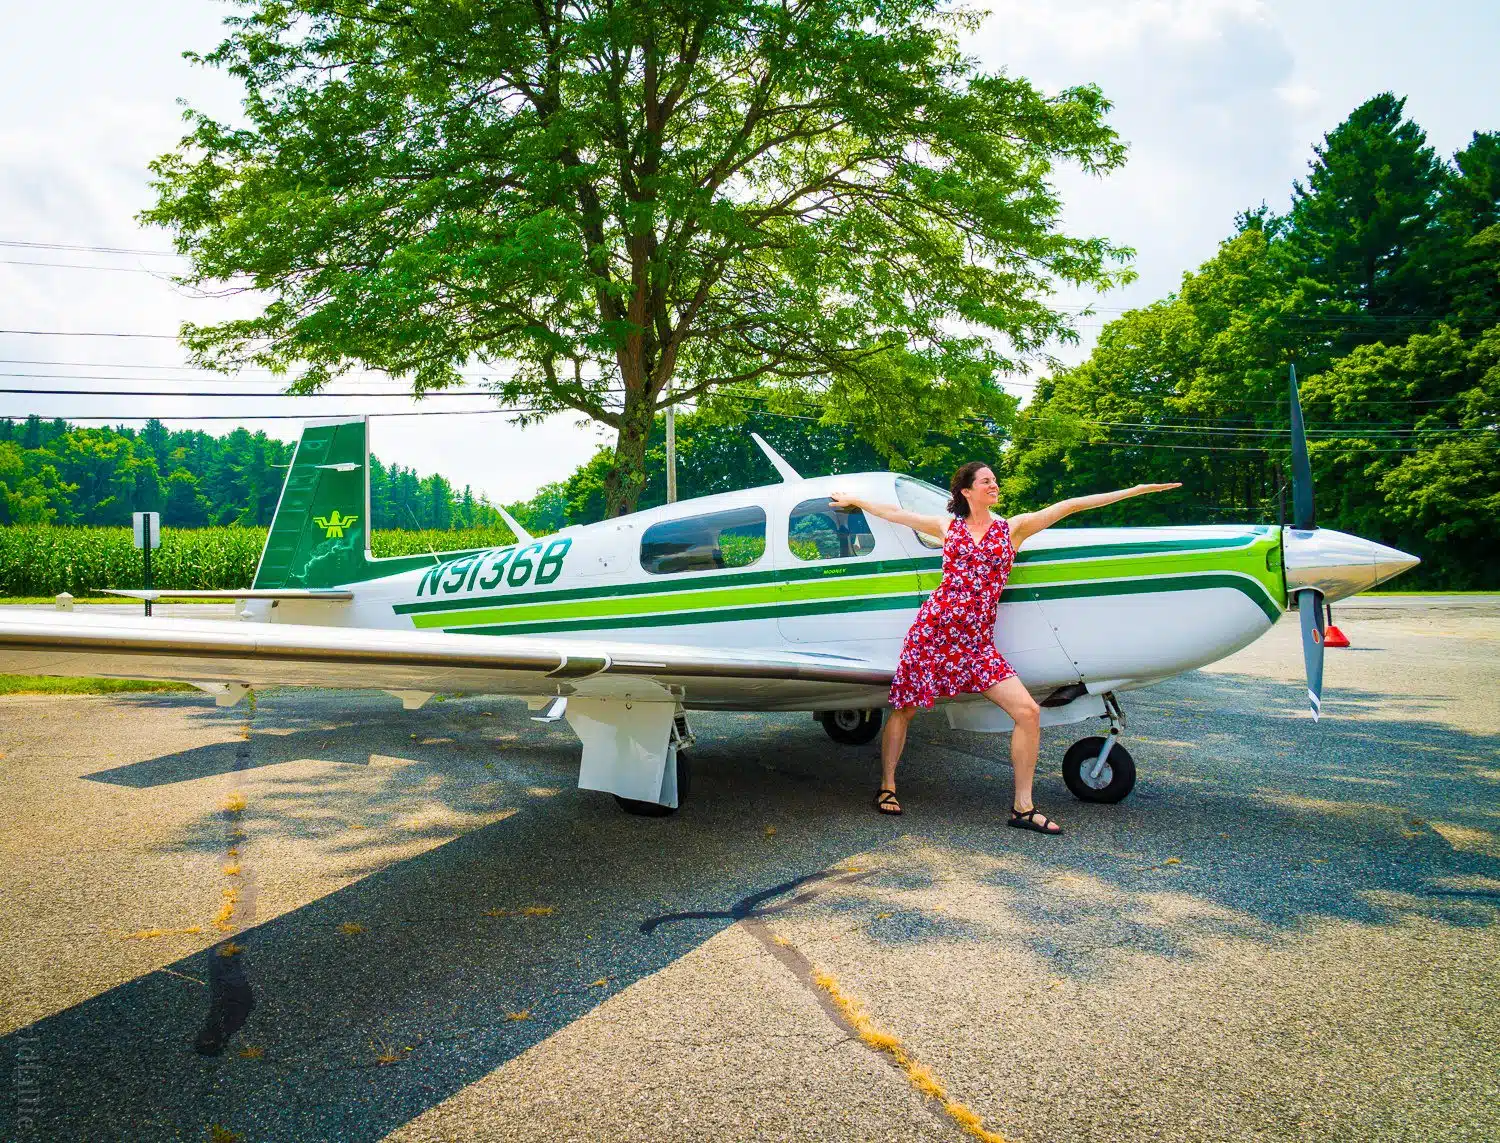 Tiny green plane and red dress